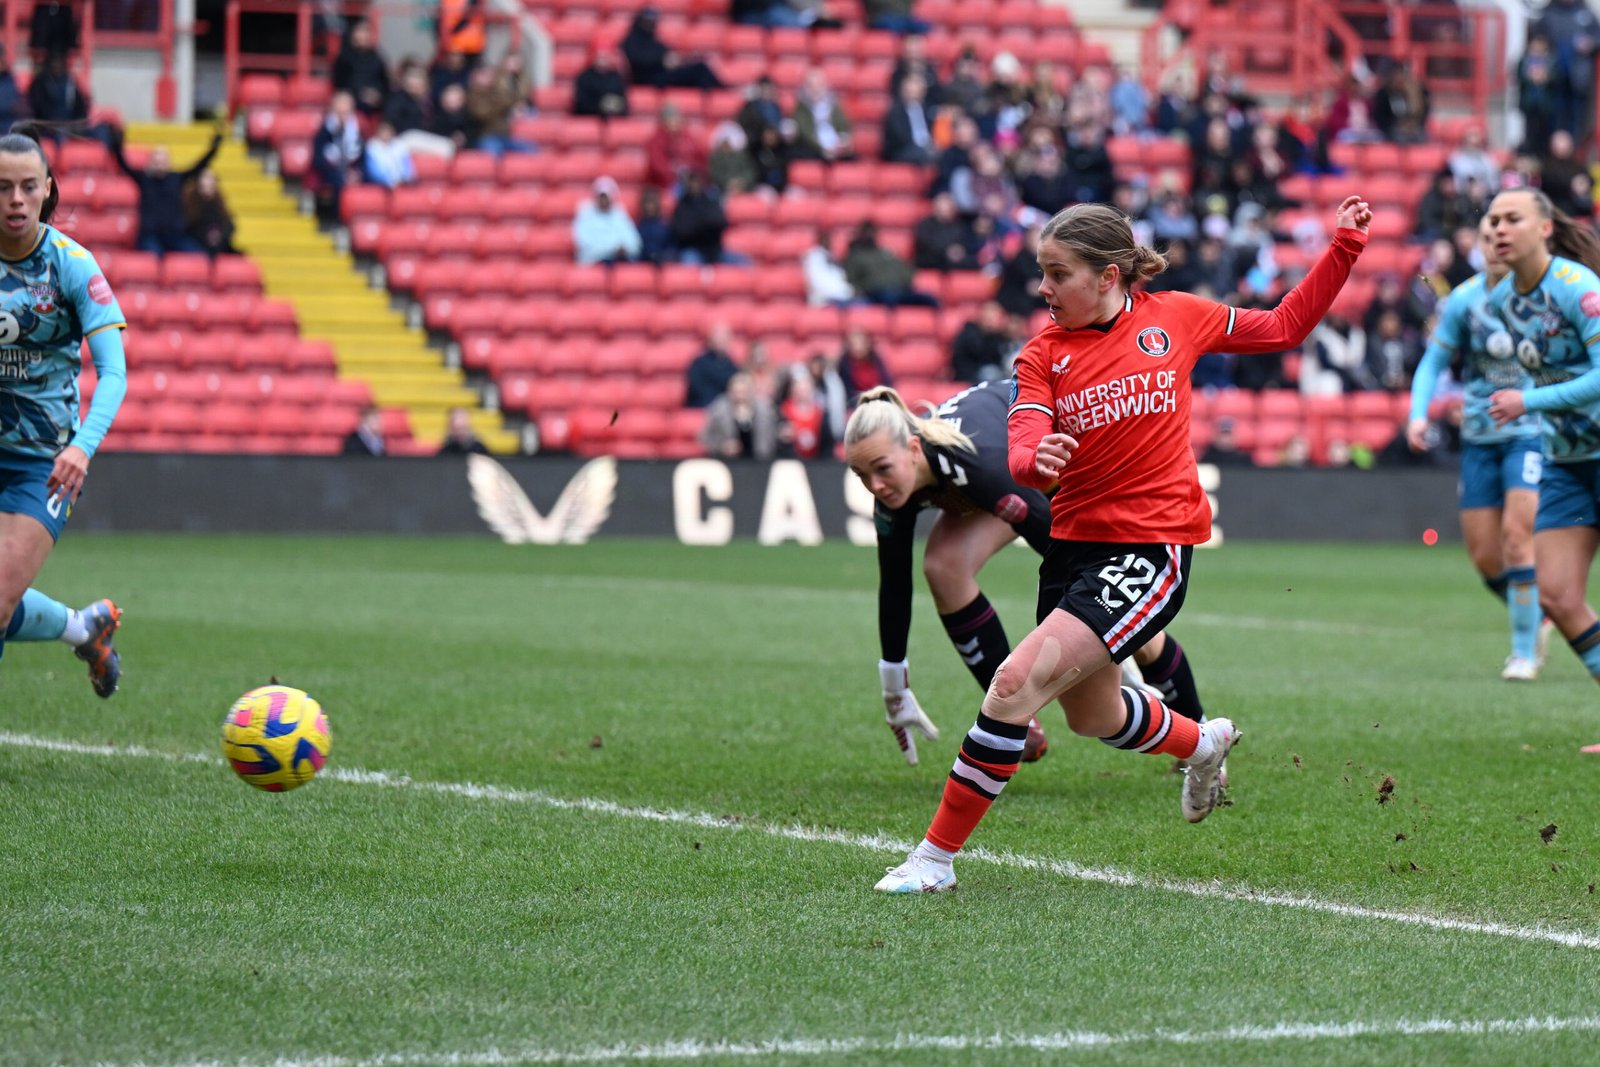 Charlton Athletic Womens 2022 23 Player Of The Year Pens New One Year Deal South London News 5566